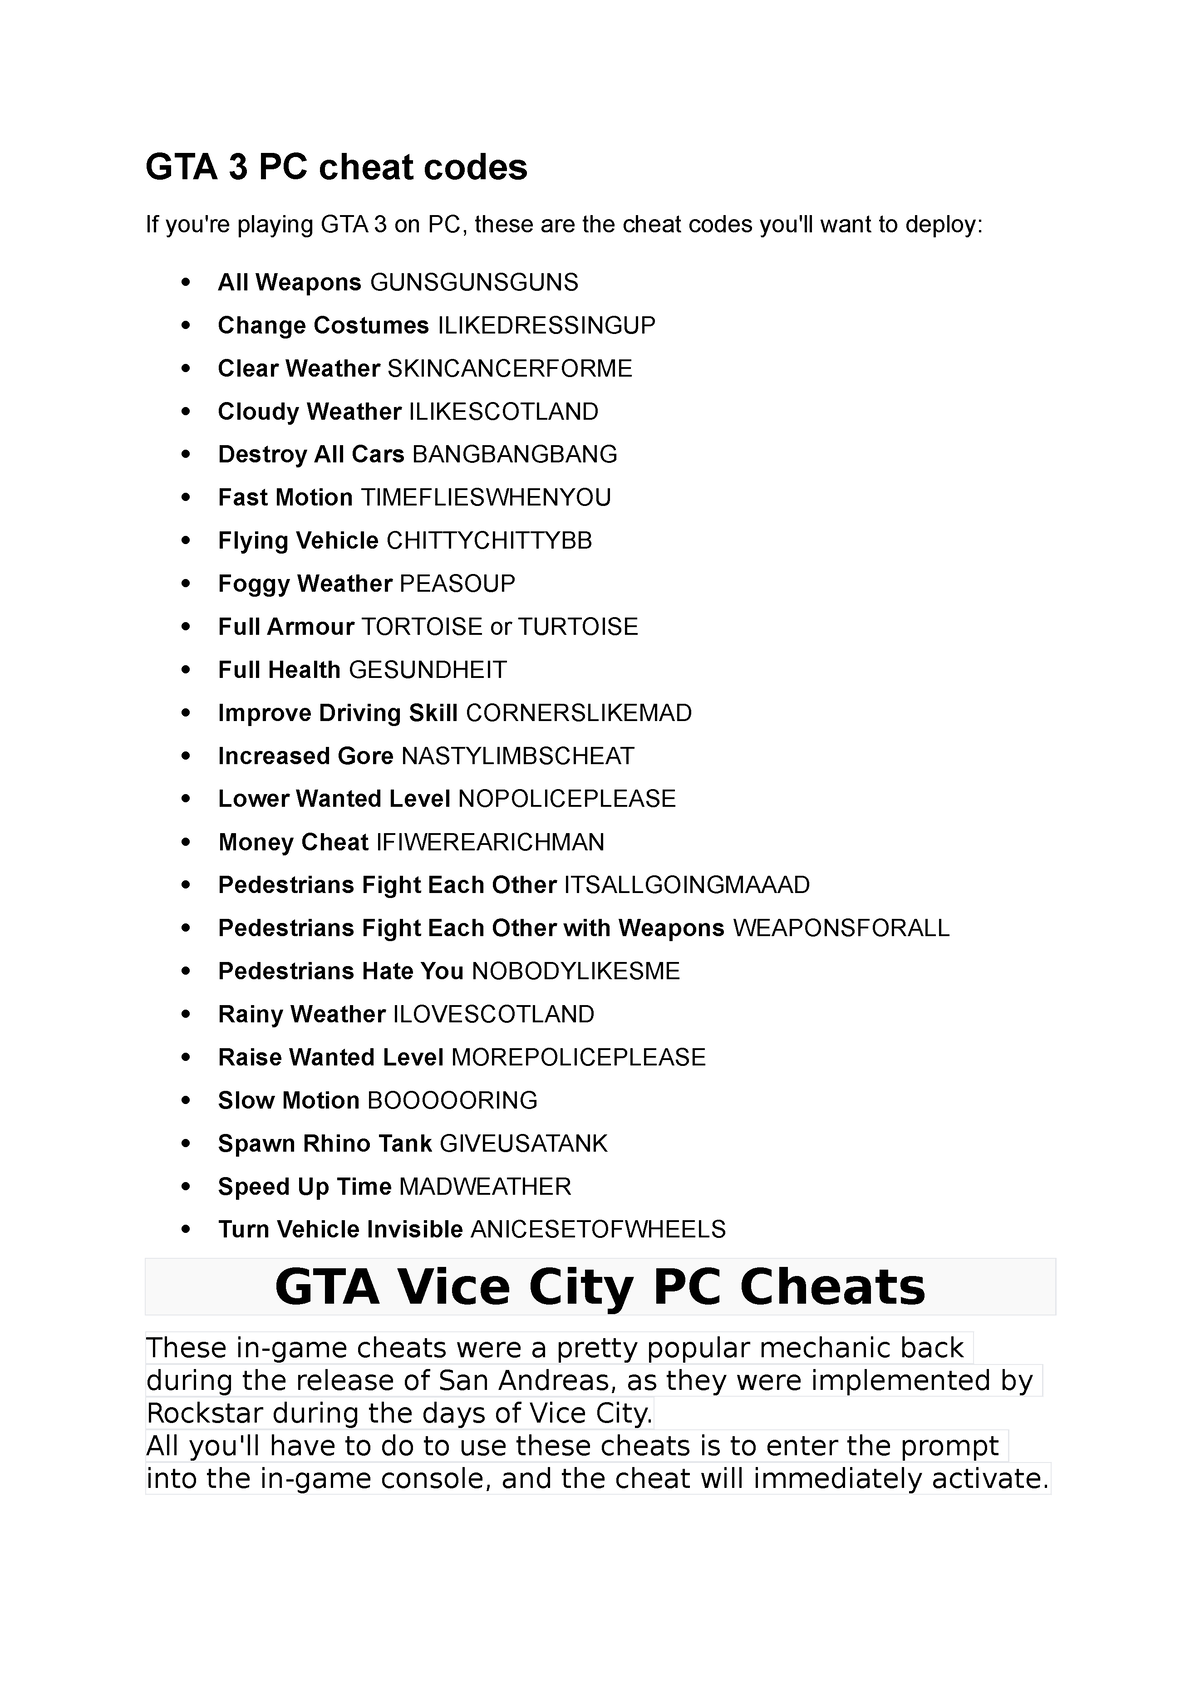 GTA 3 Cheat Codes for PC - GameNGadgets